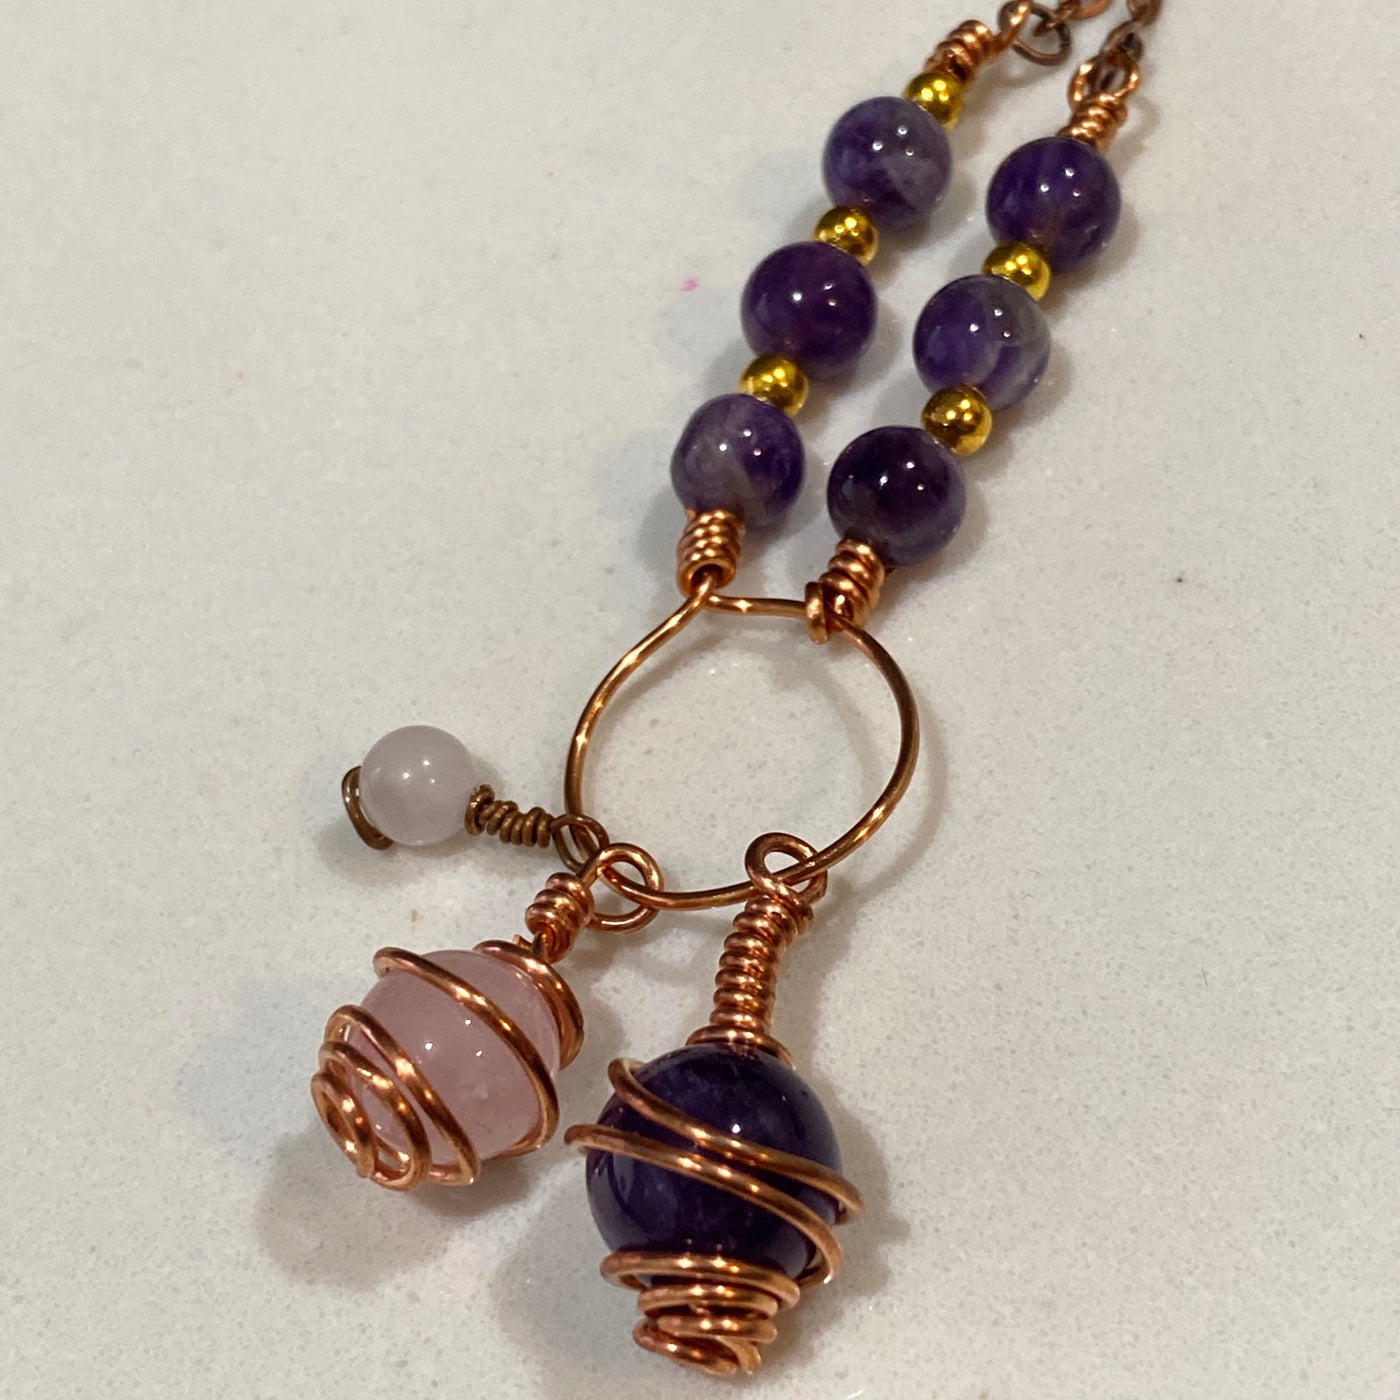 Pendant Amethyst and  rose quartz on wire and chain for Shake and move collection.